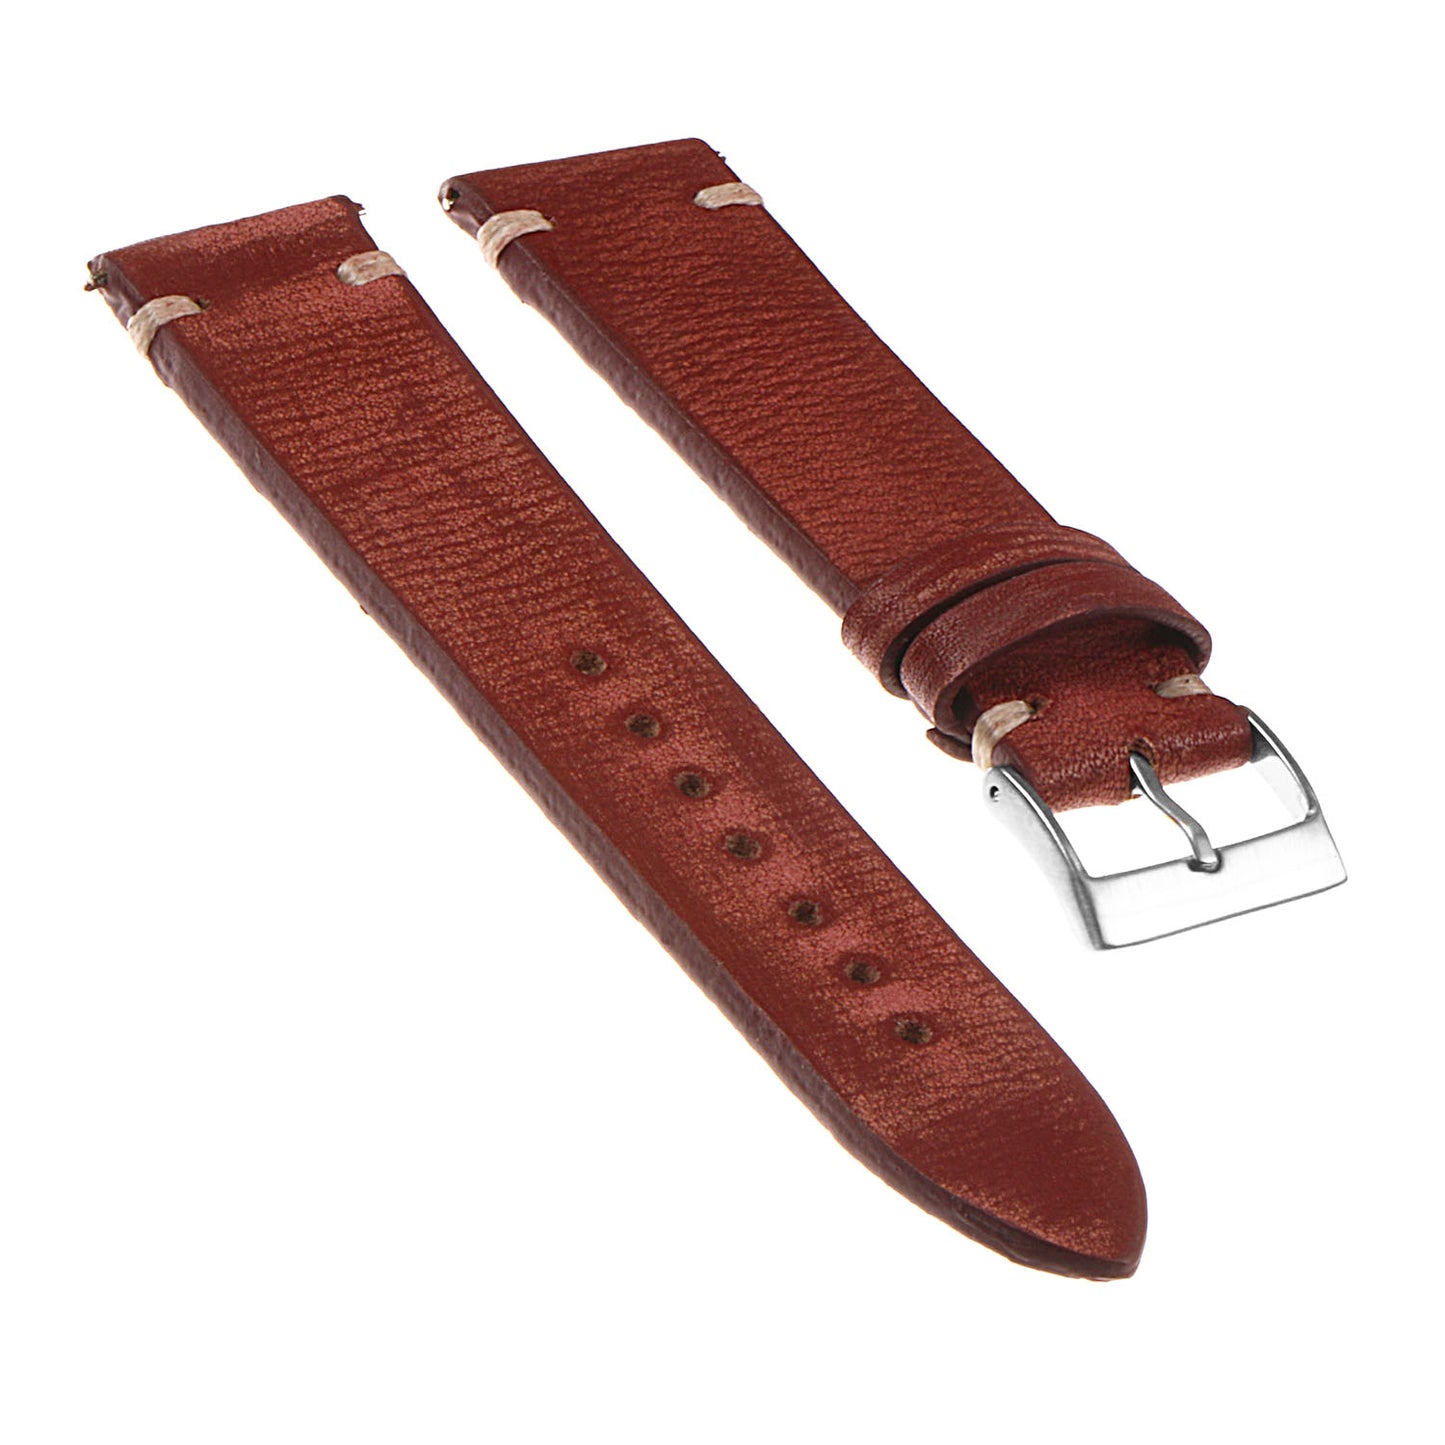 Hand-Stitched Vintage Washed Leather Strap for Suunto 7